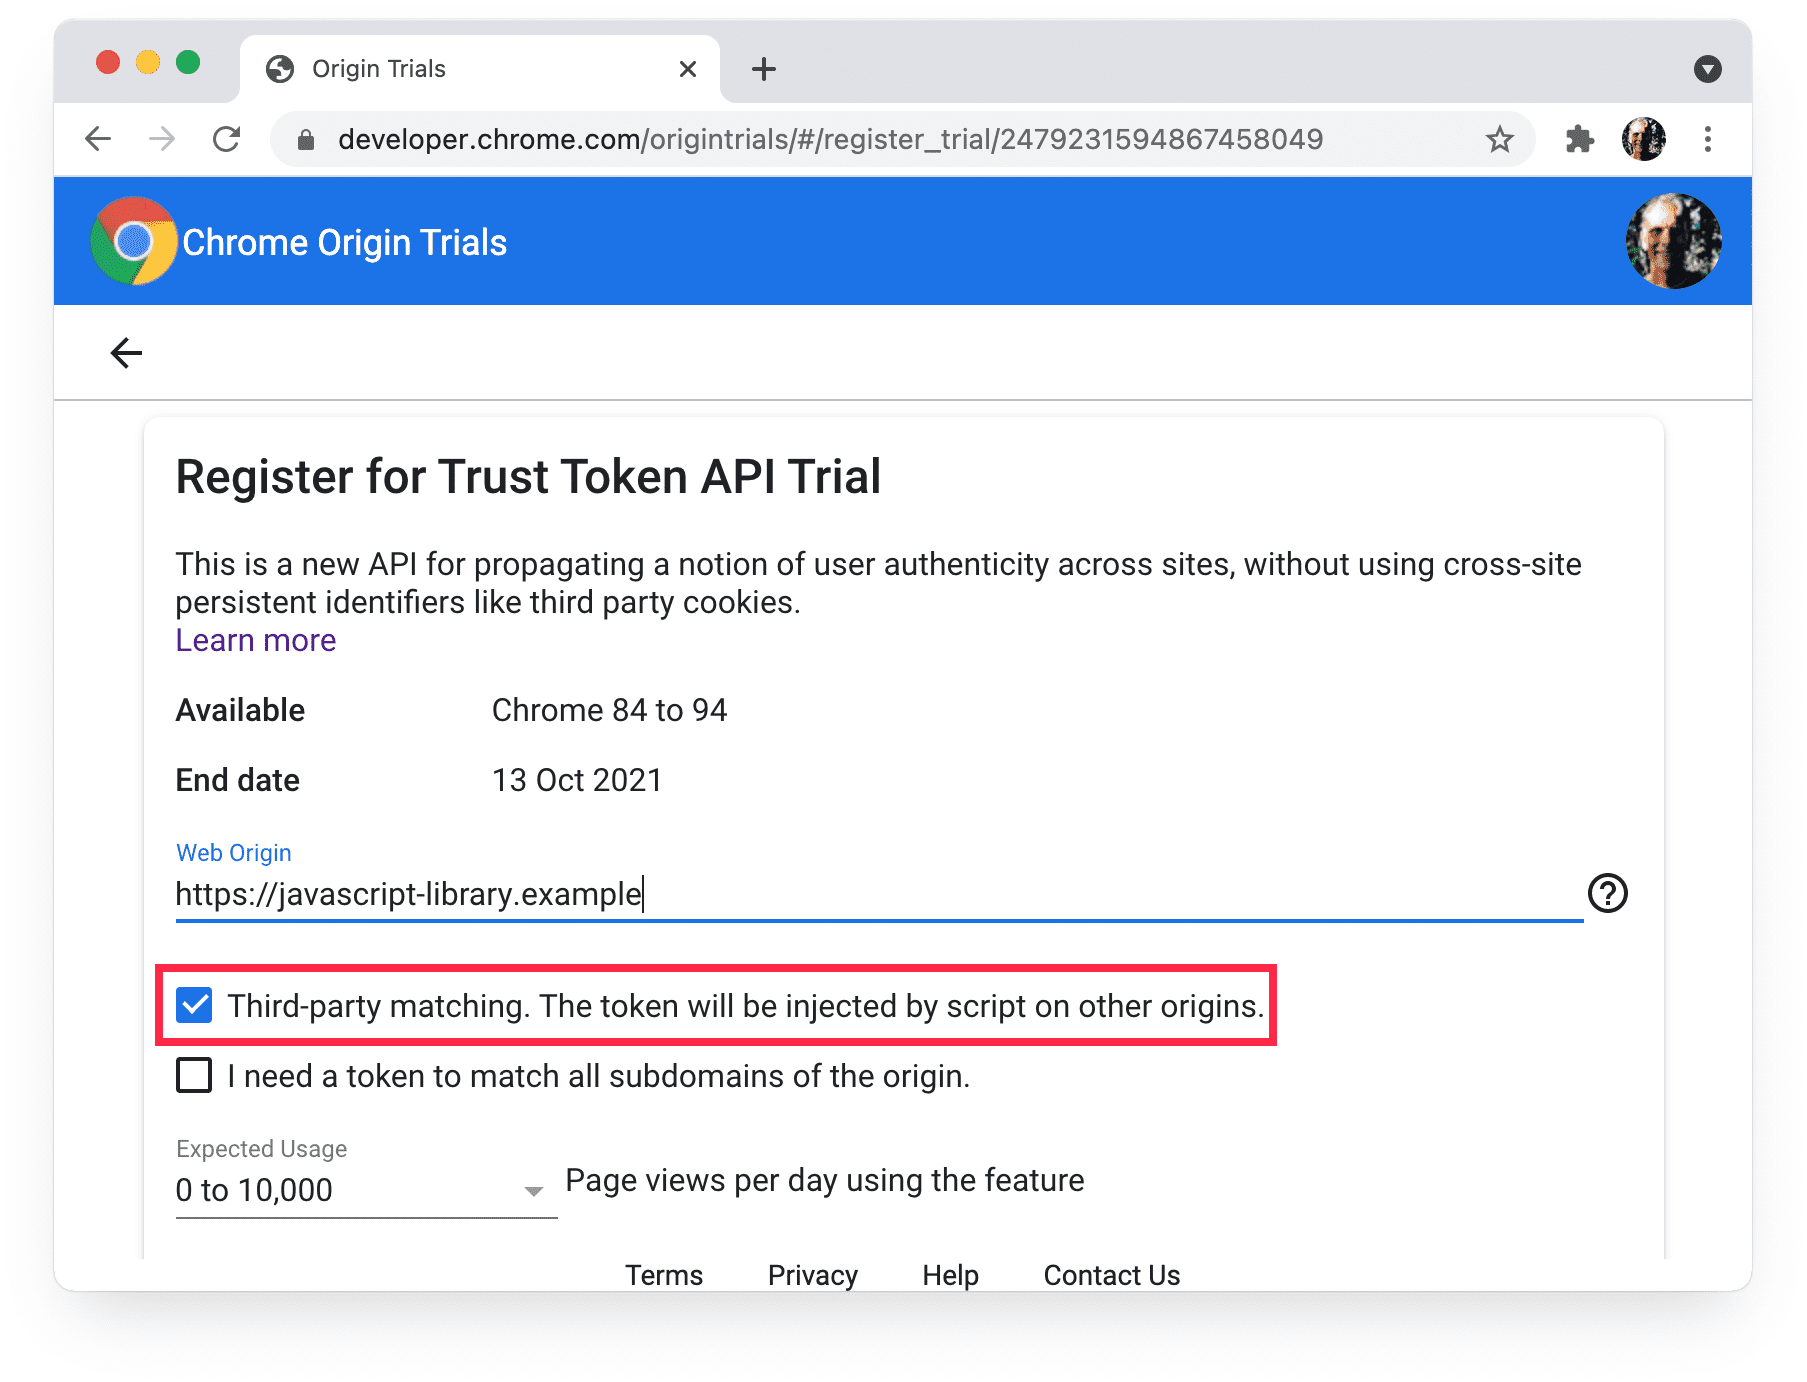 Chrome origin trials 
registration page showing third-party matching selected.